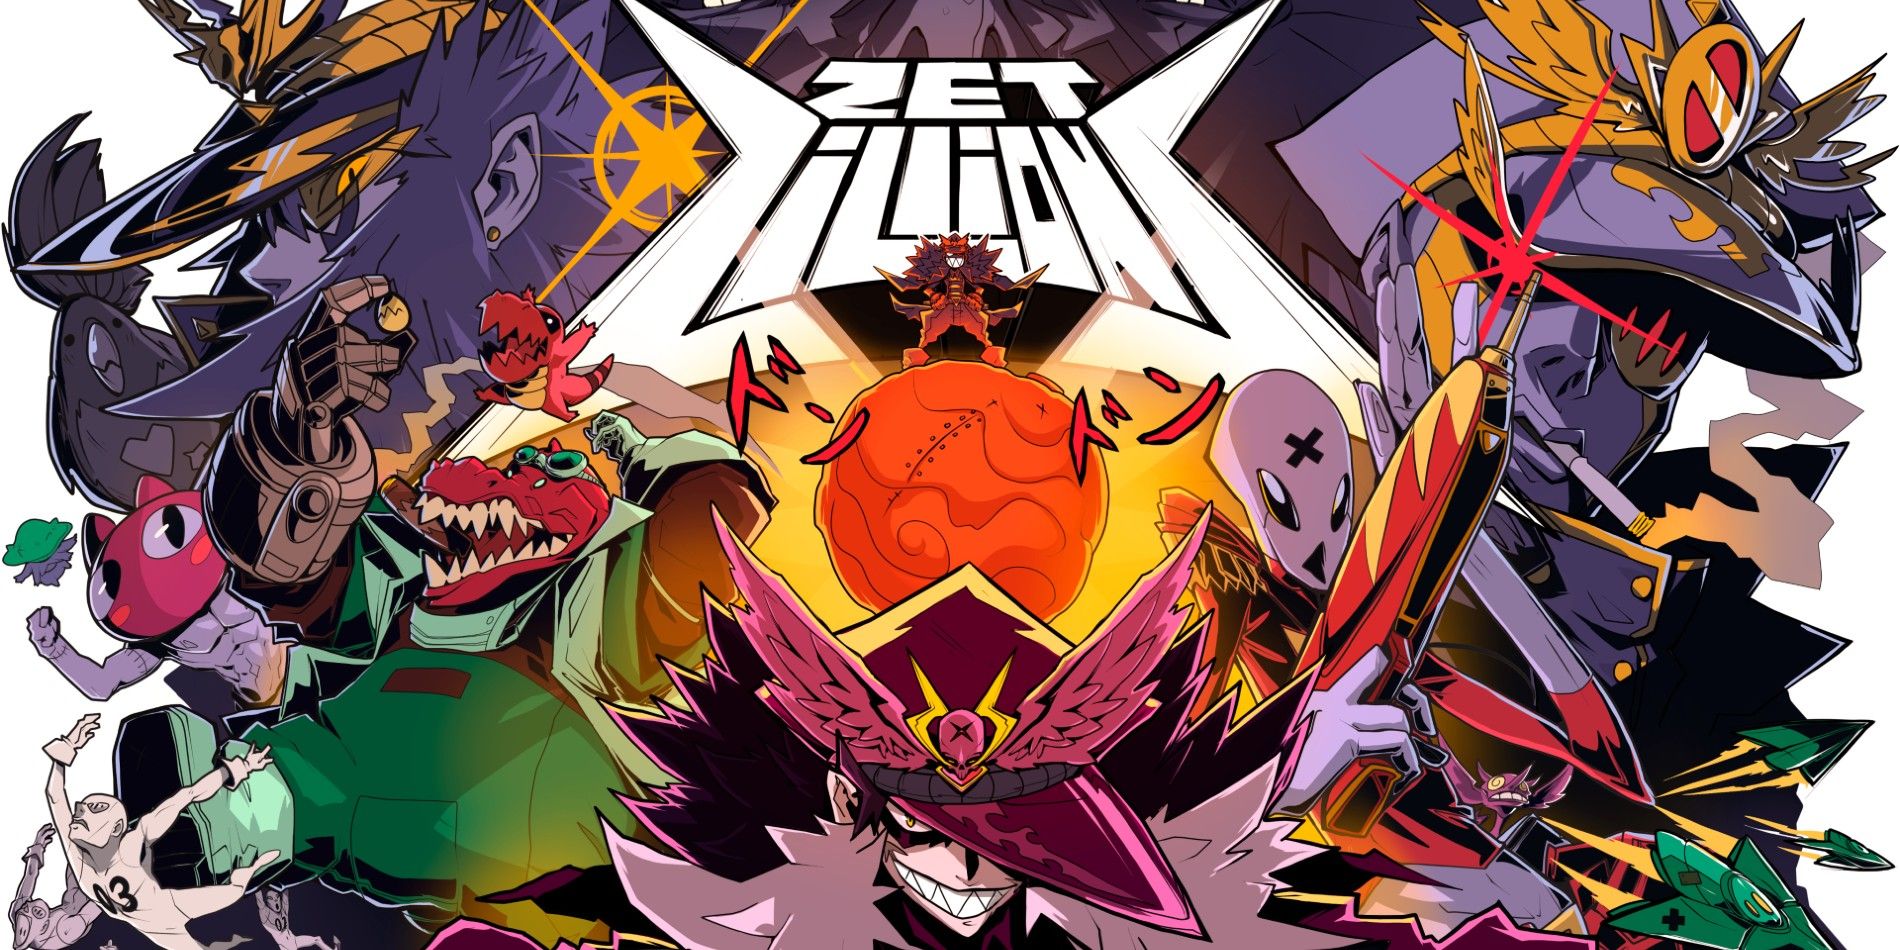 Zet Zillions key art showing a red planet in the middle of a group of aliens, with character Foam Gun in a military style pink cap and text that says Zet Zillions in the top middle.